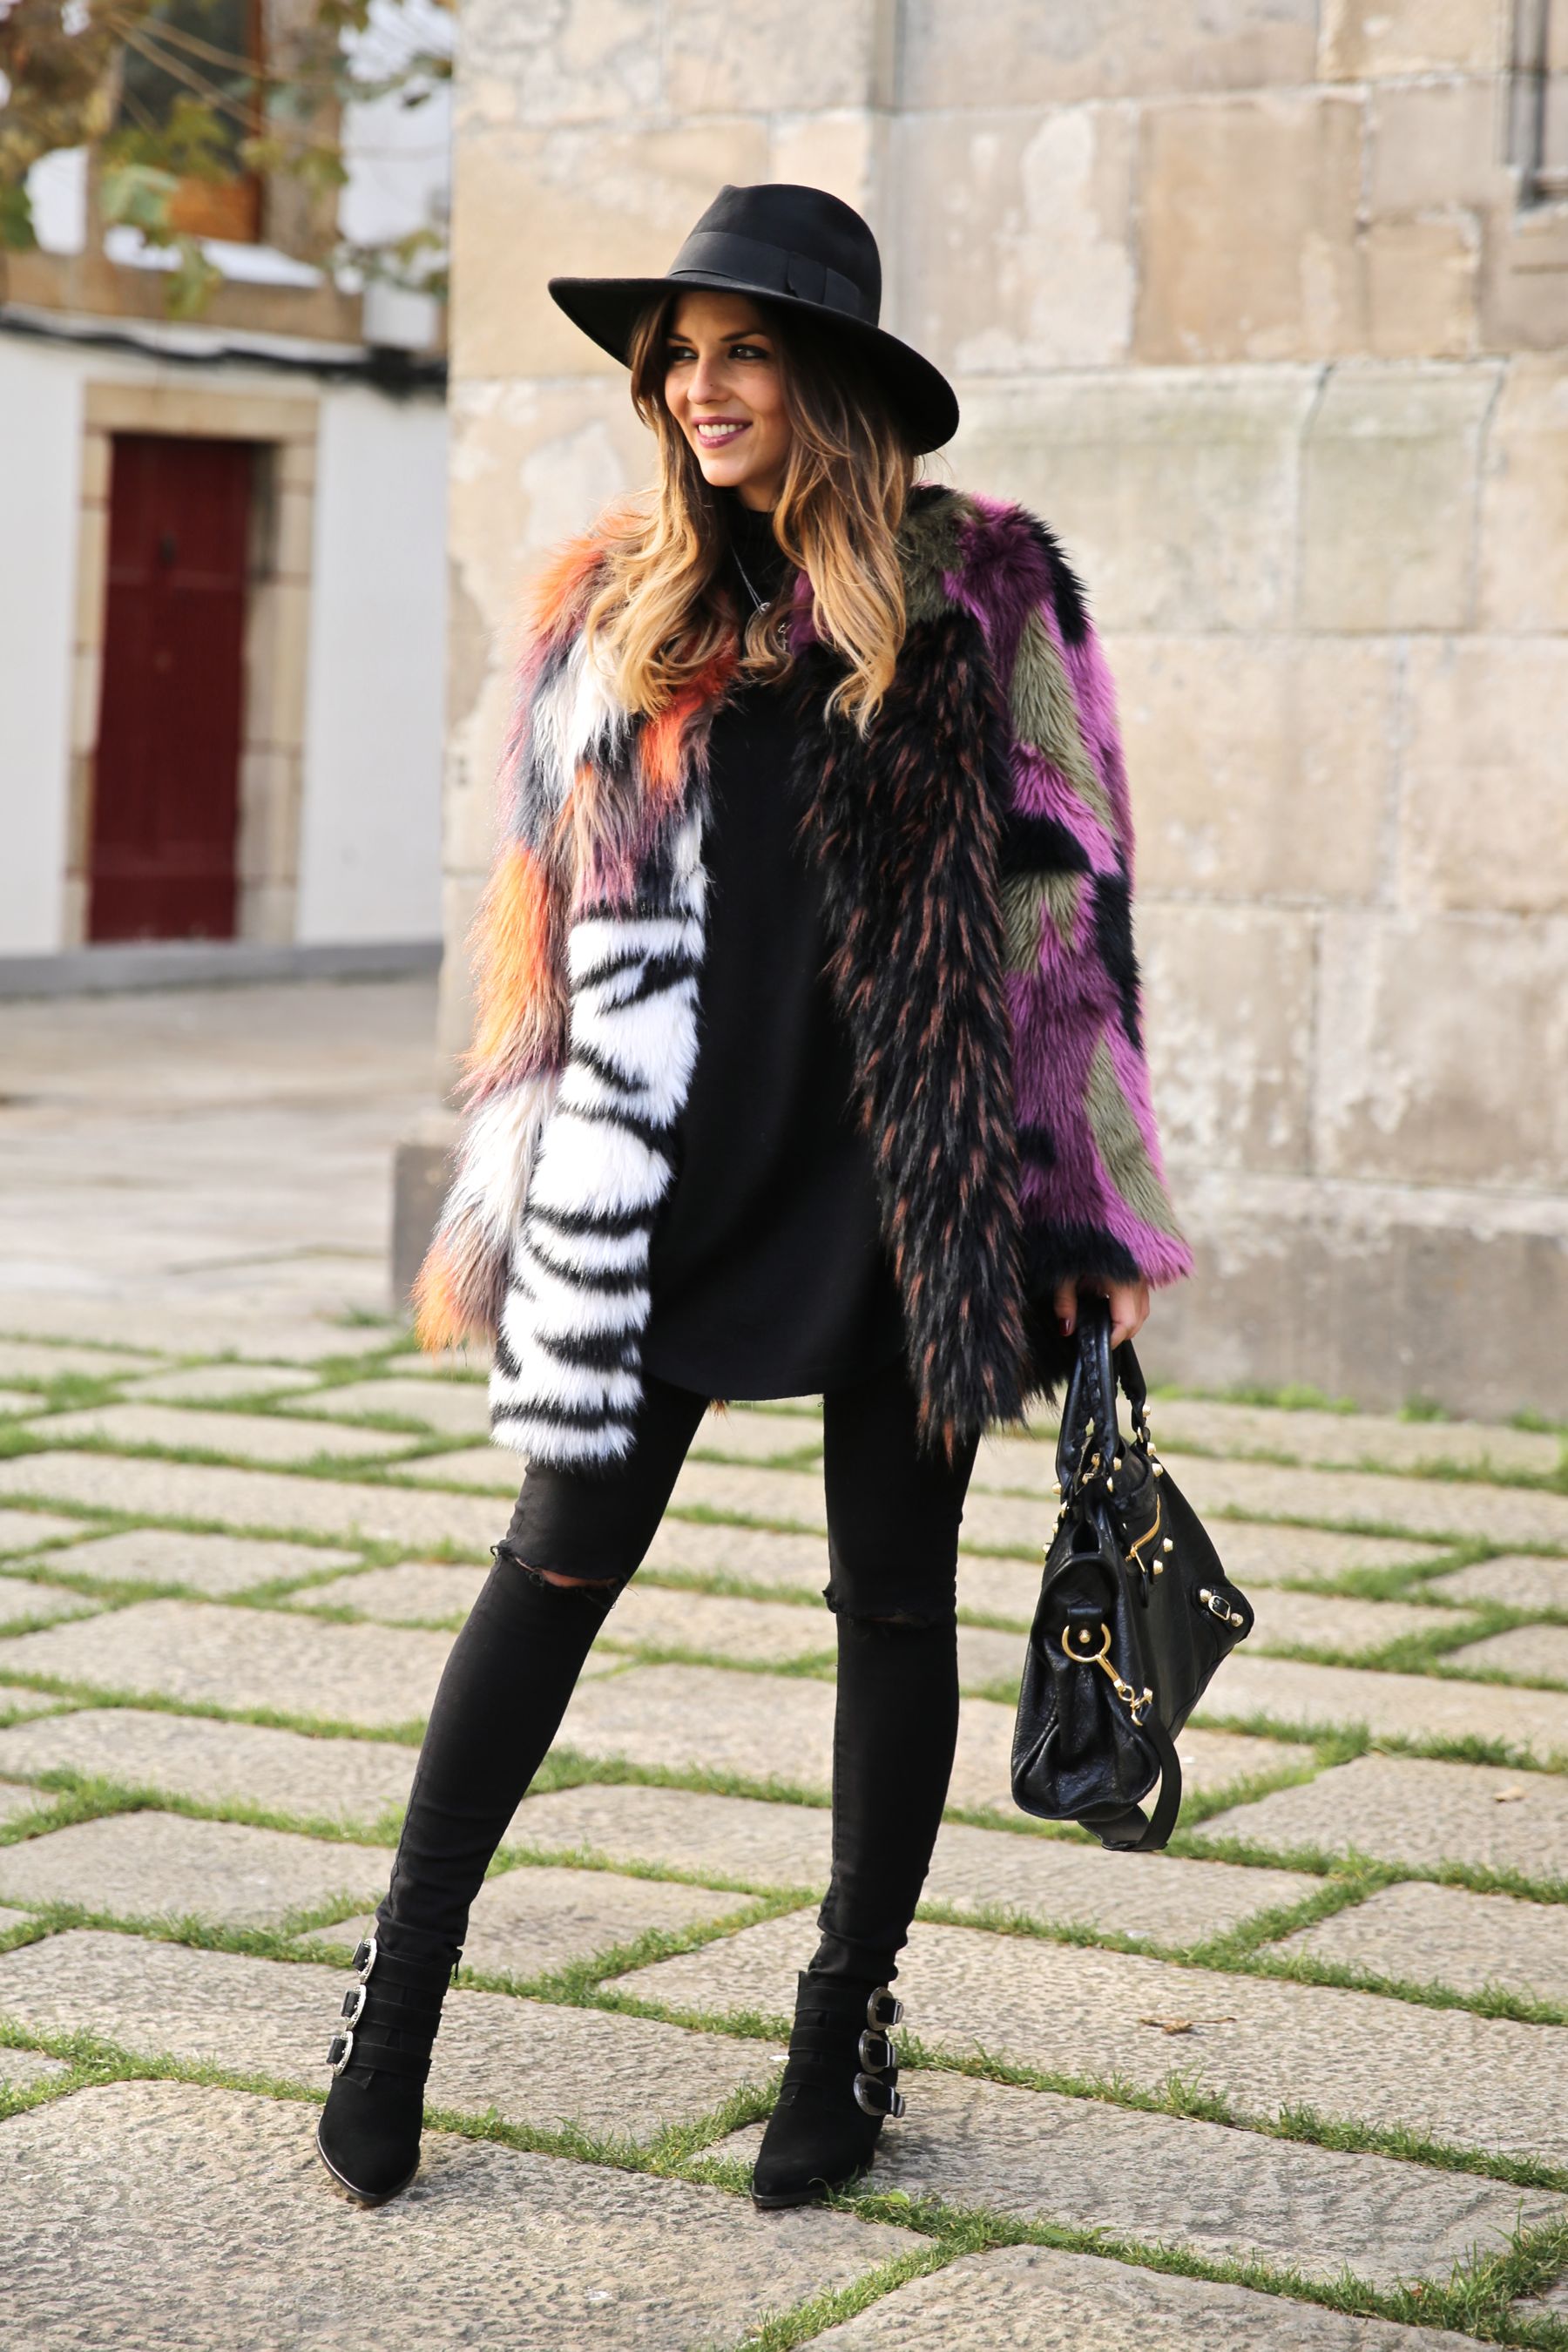 How To Wear Faux Fur Coats This Winter   18 Stylish Outfit Ideas